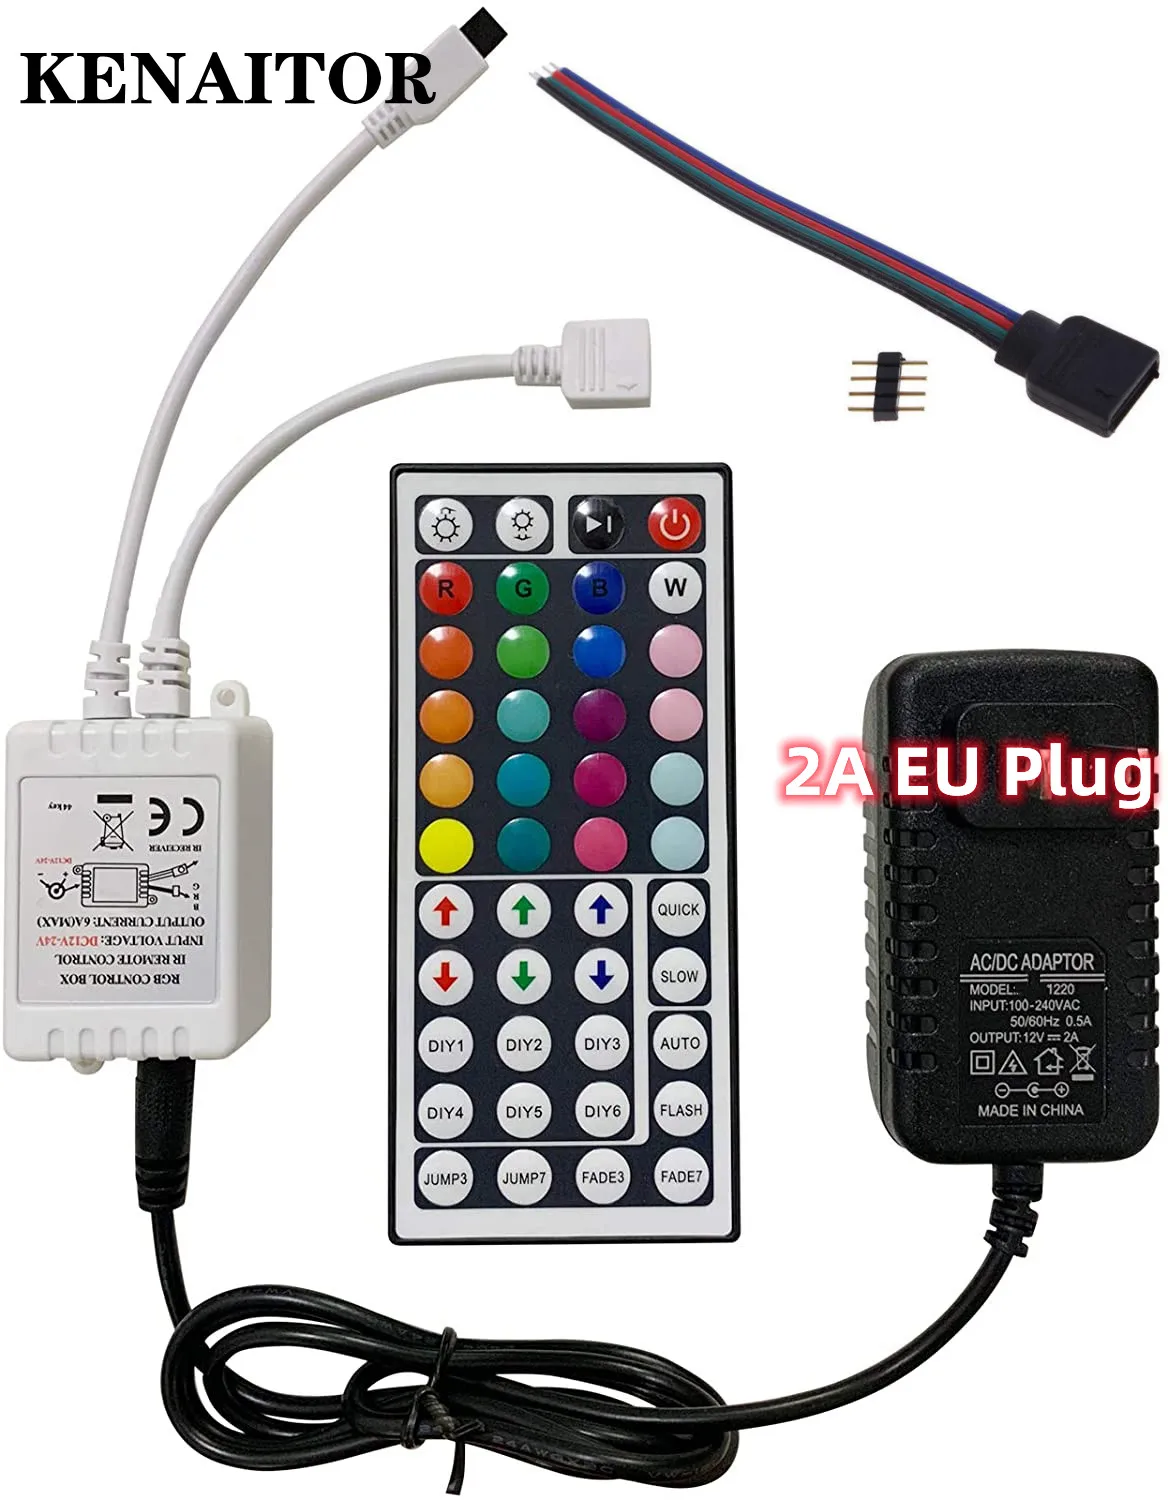 

44 Key IR Remote Controller Kit Wireless Rectifier Control Box DC 12V 2A LED Power Supply Adapter for 2835 3528 5050 RGB LED